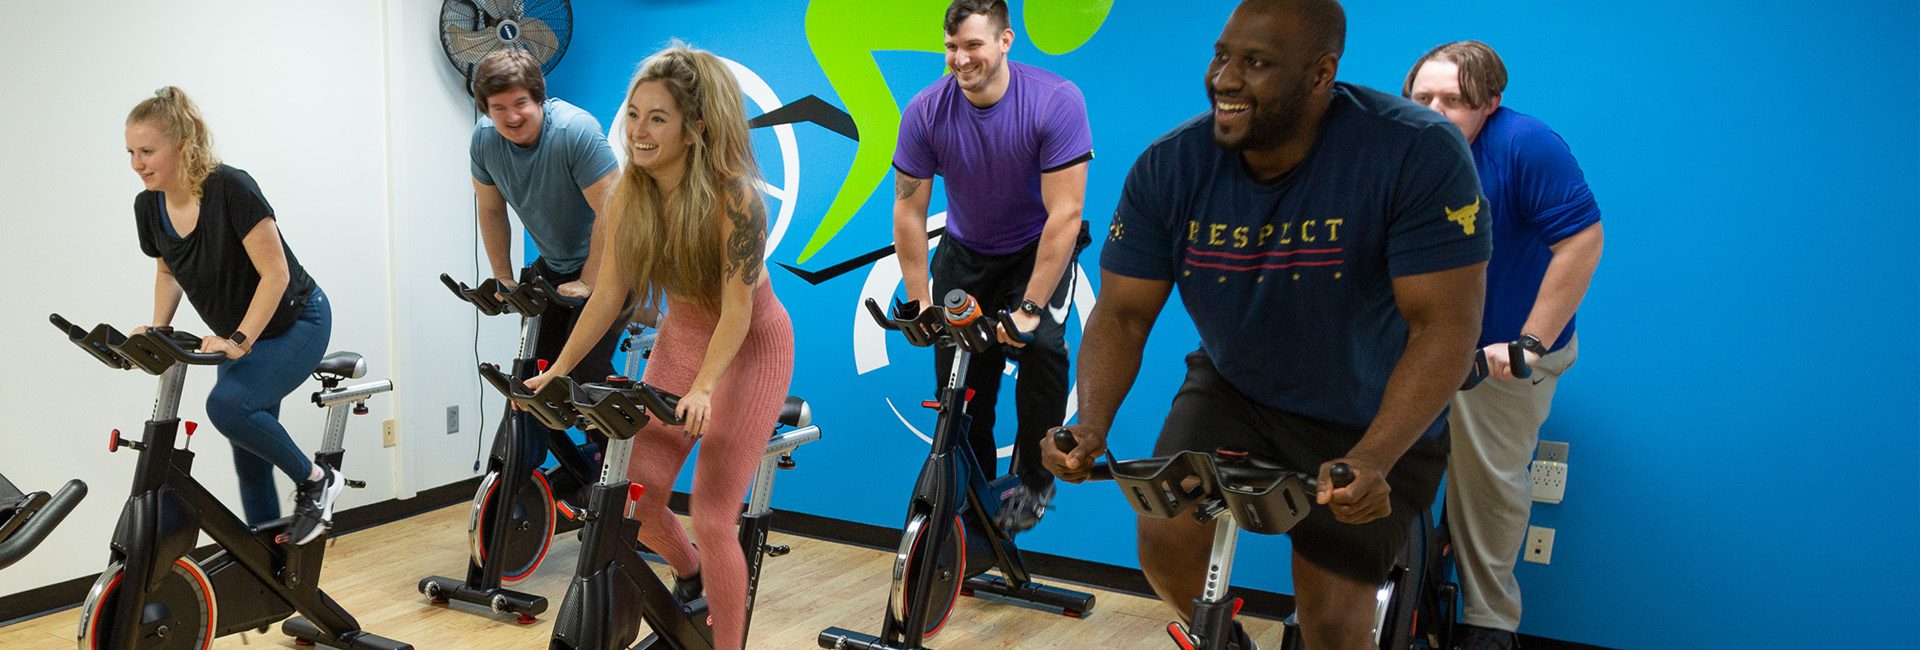 group of people working out on cardio machines